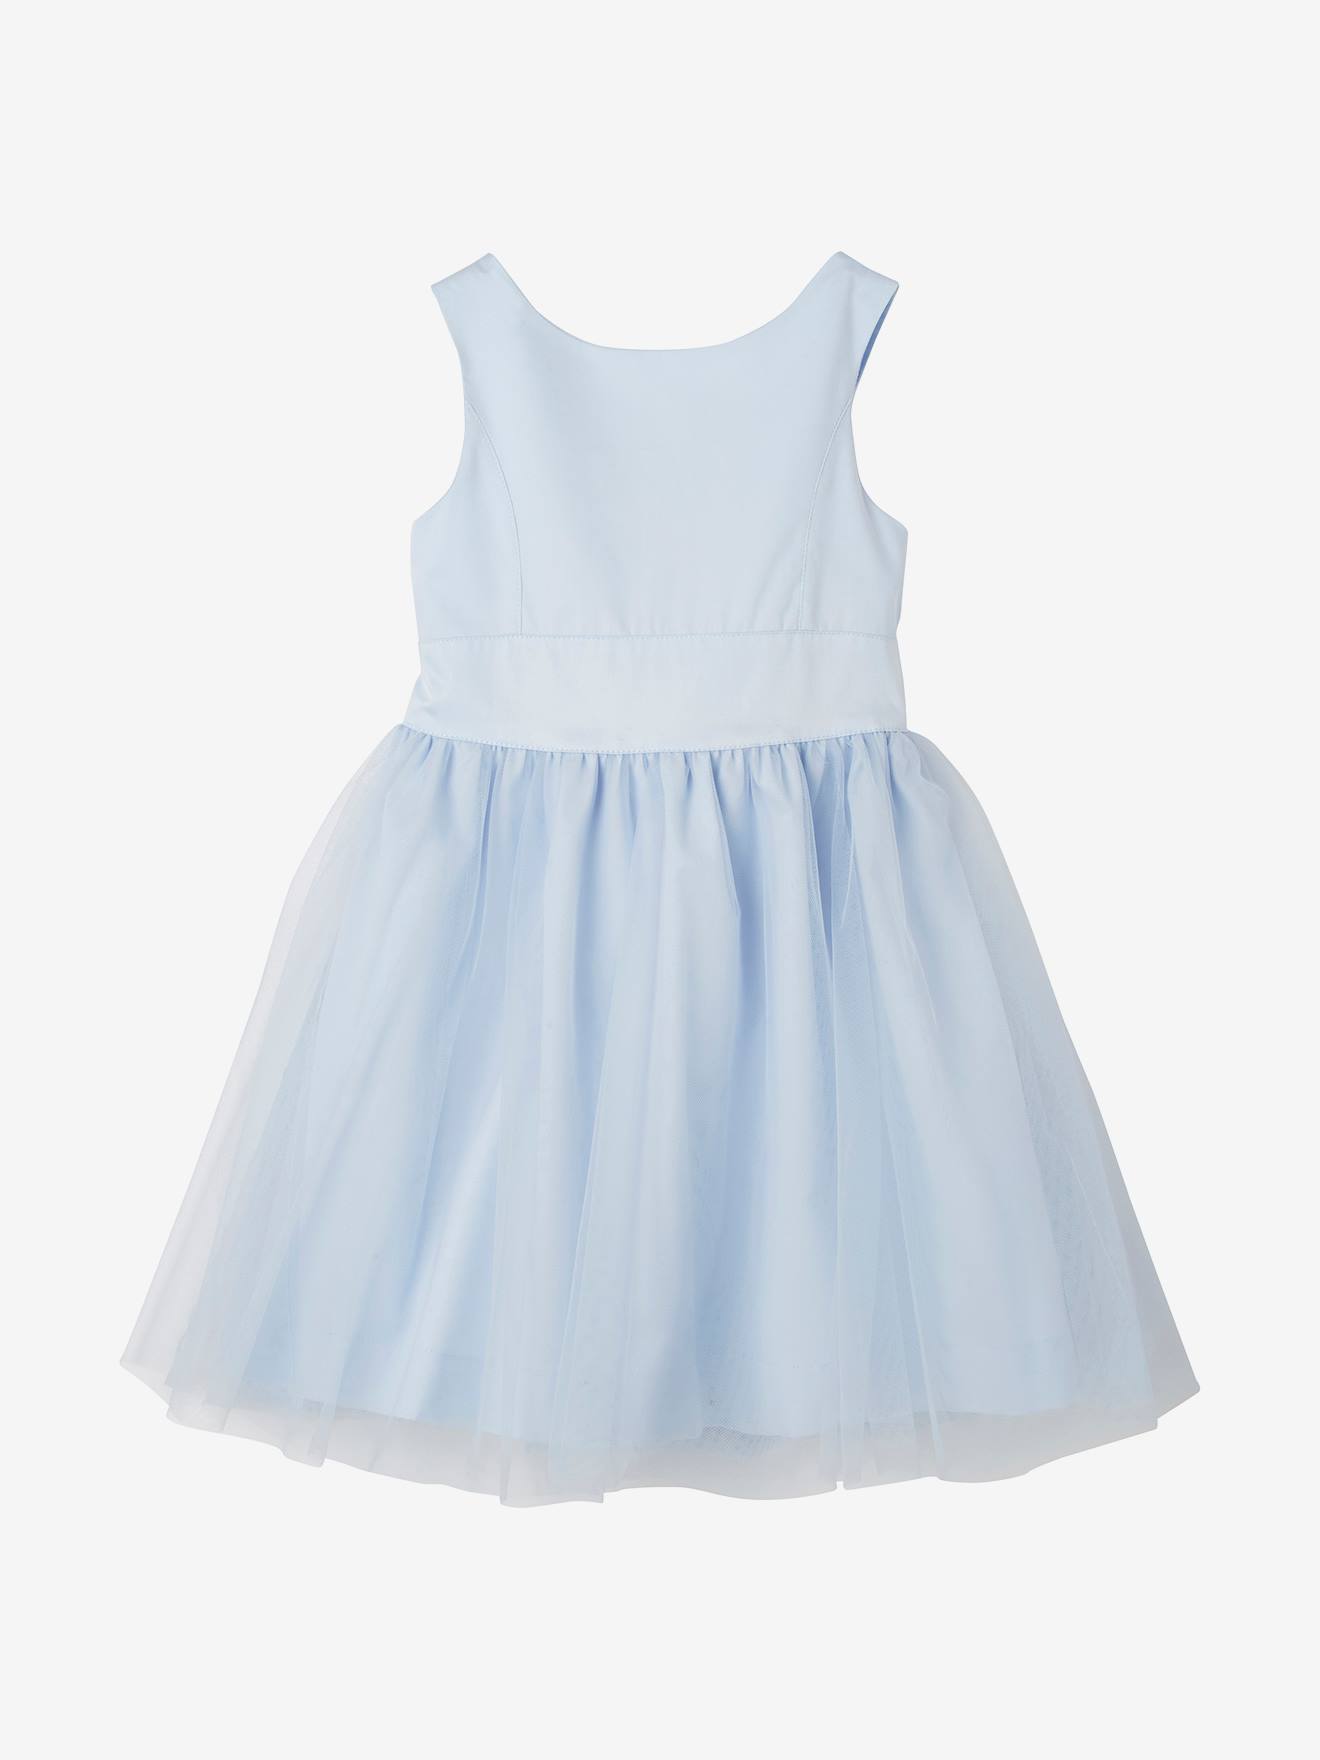 Girls’ Sateen & Tulle Occasion Dress blue light solid